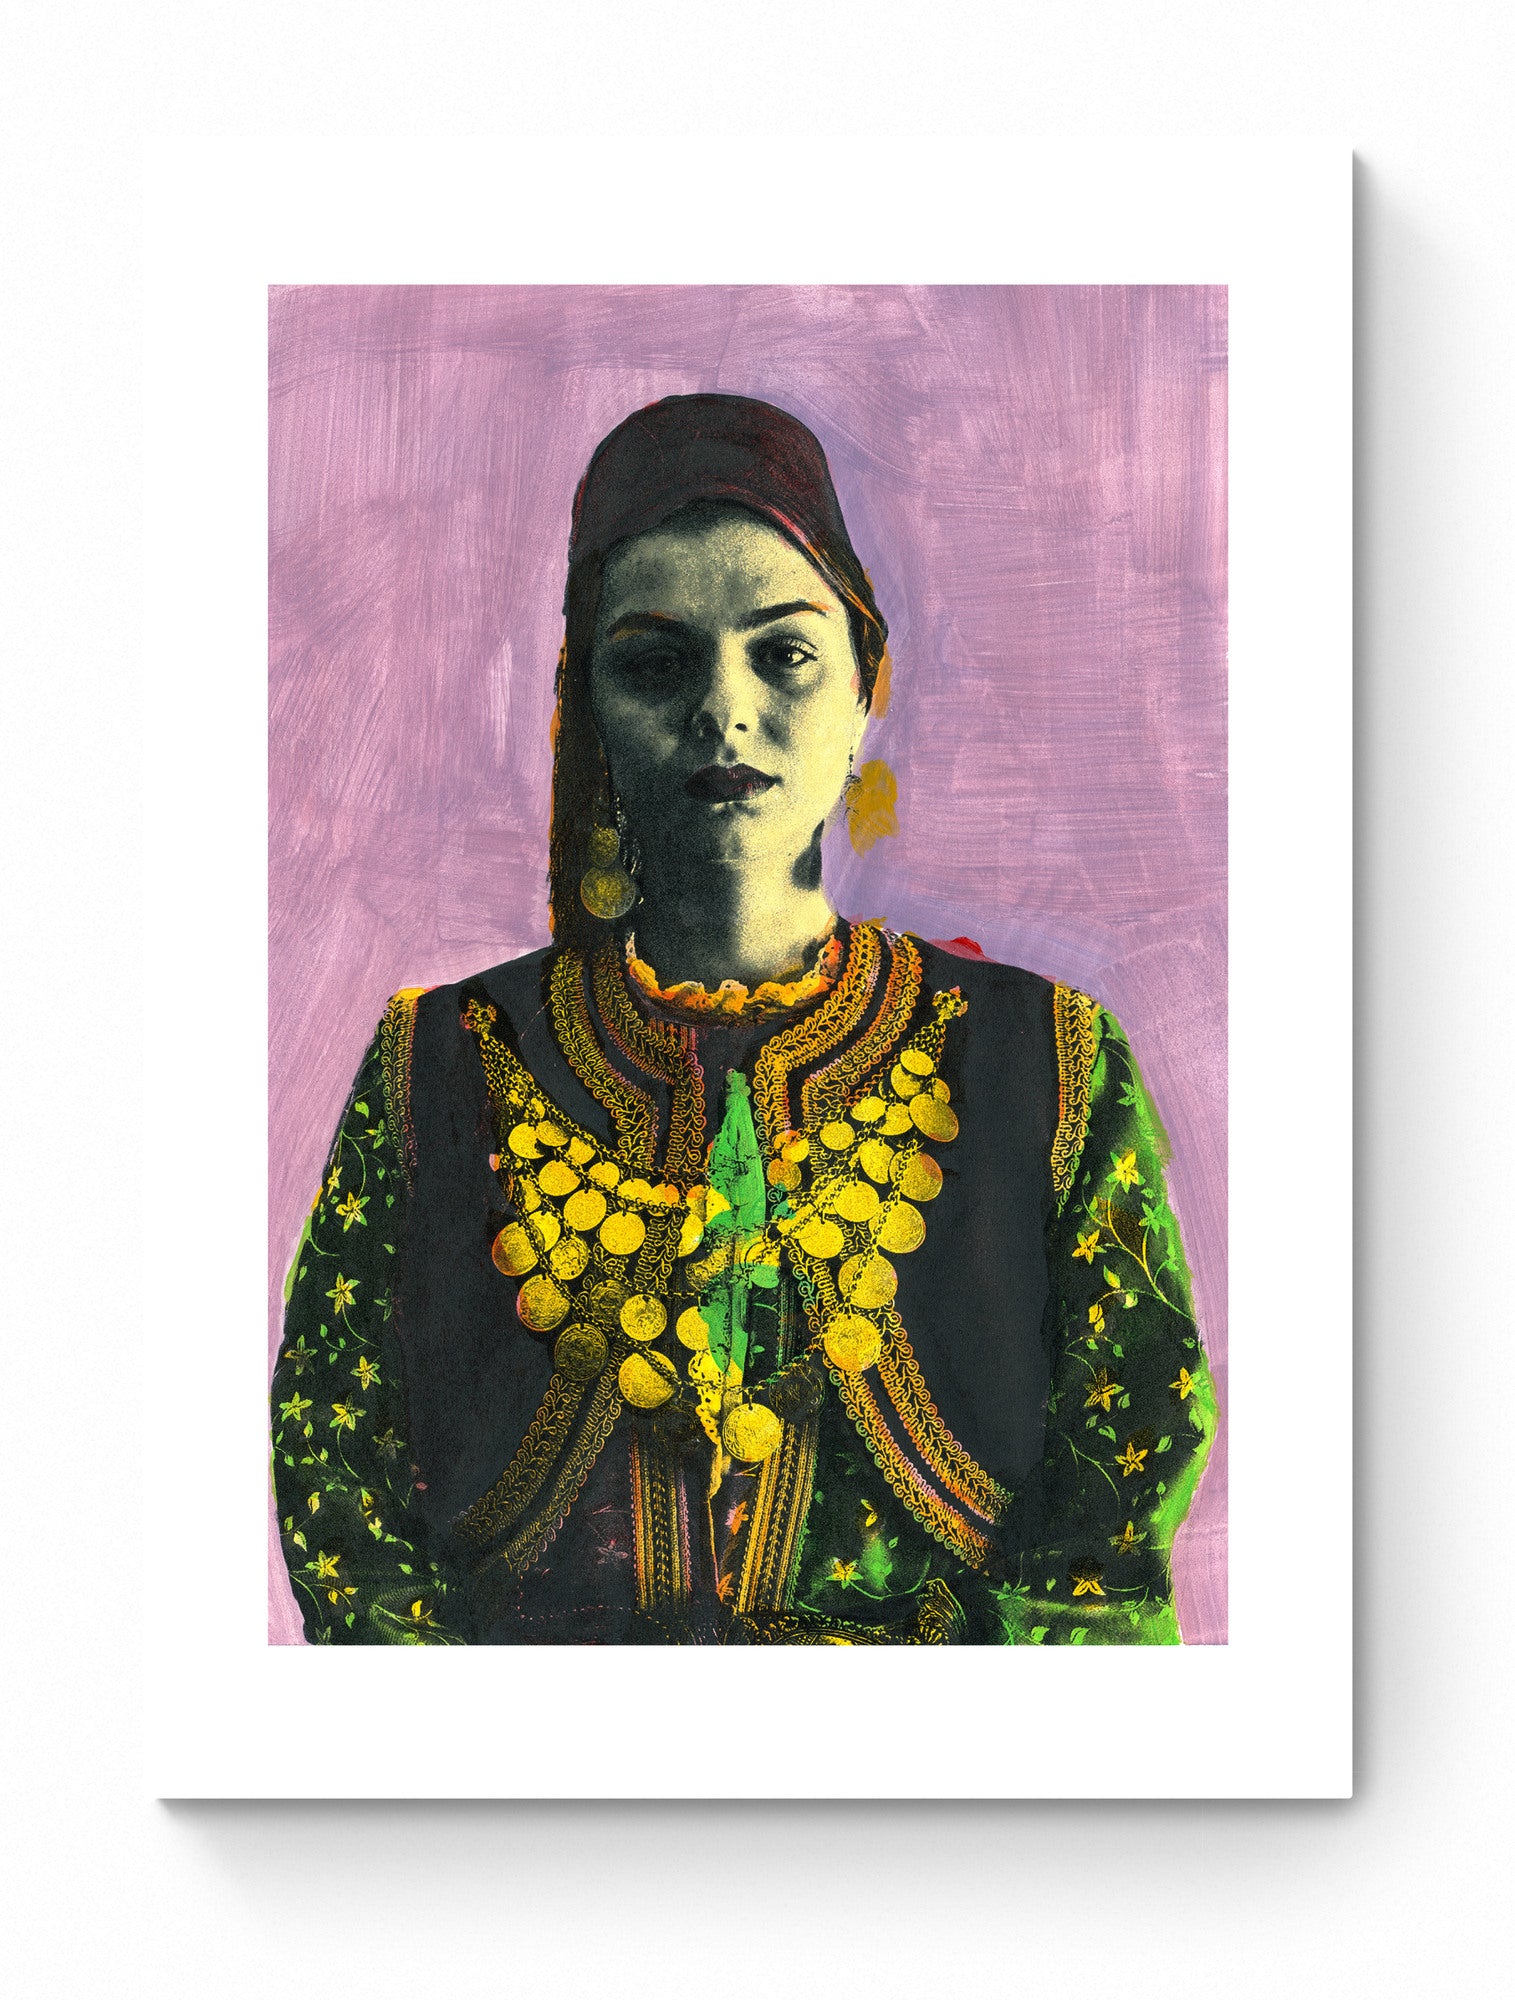 Painting Pop Art Wall Art from Greece | Mauve Kastoria Urban Costume from Macedonia, by George Tatakis - poster